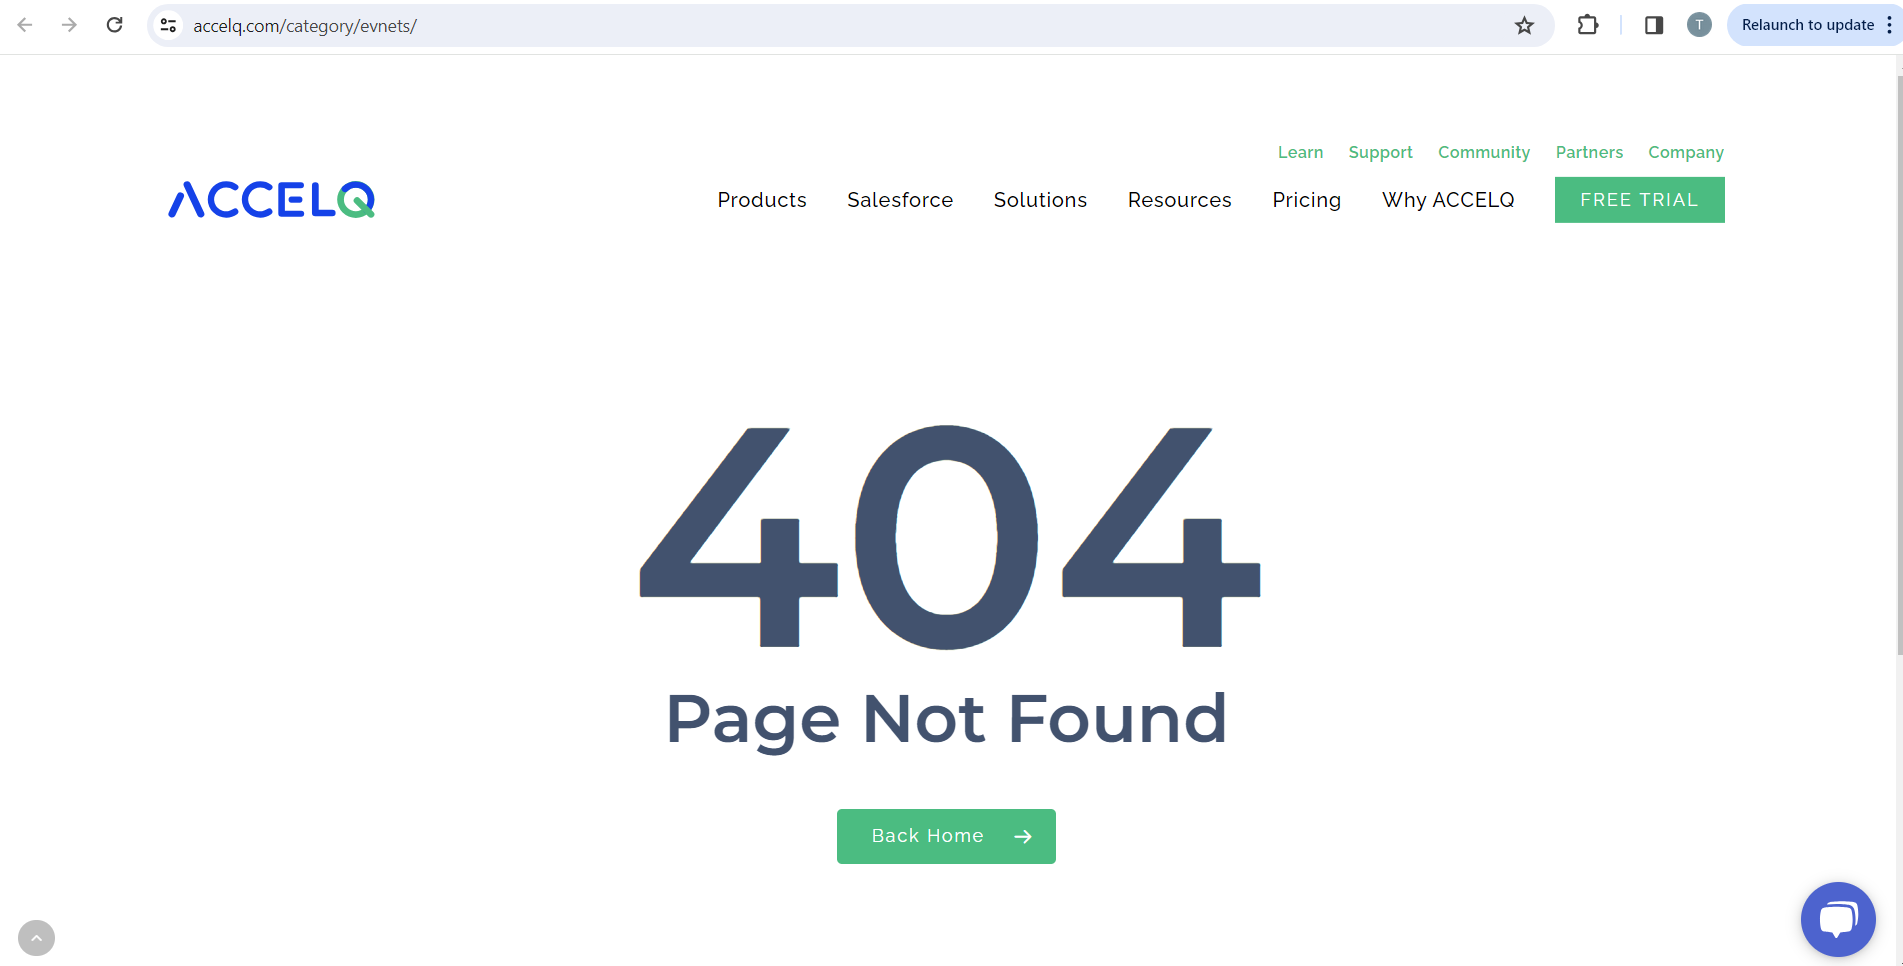 A 404 error is displayed after clicking News link